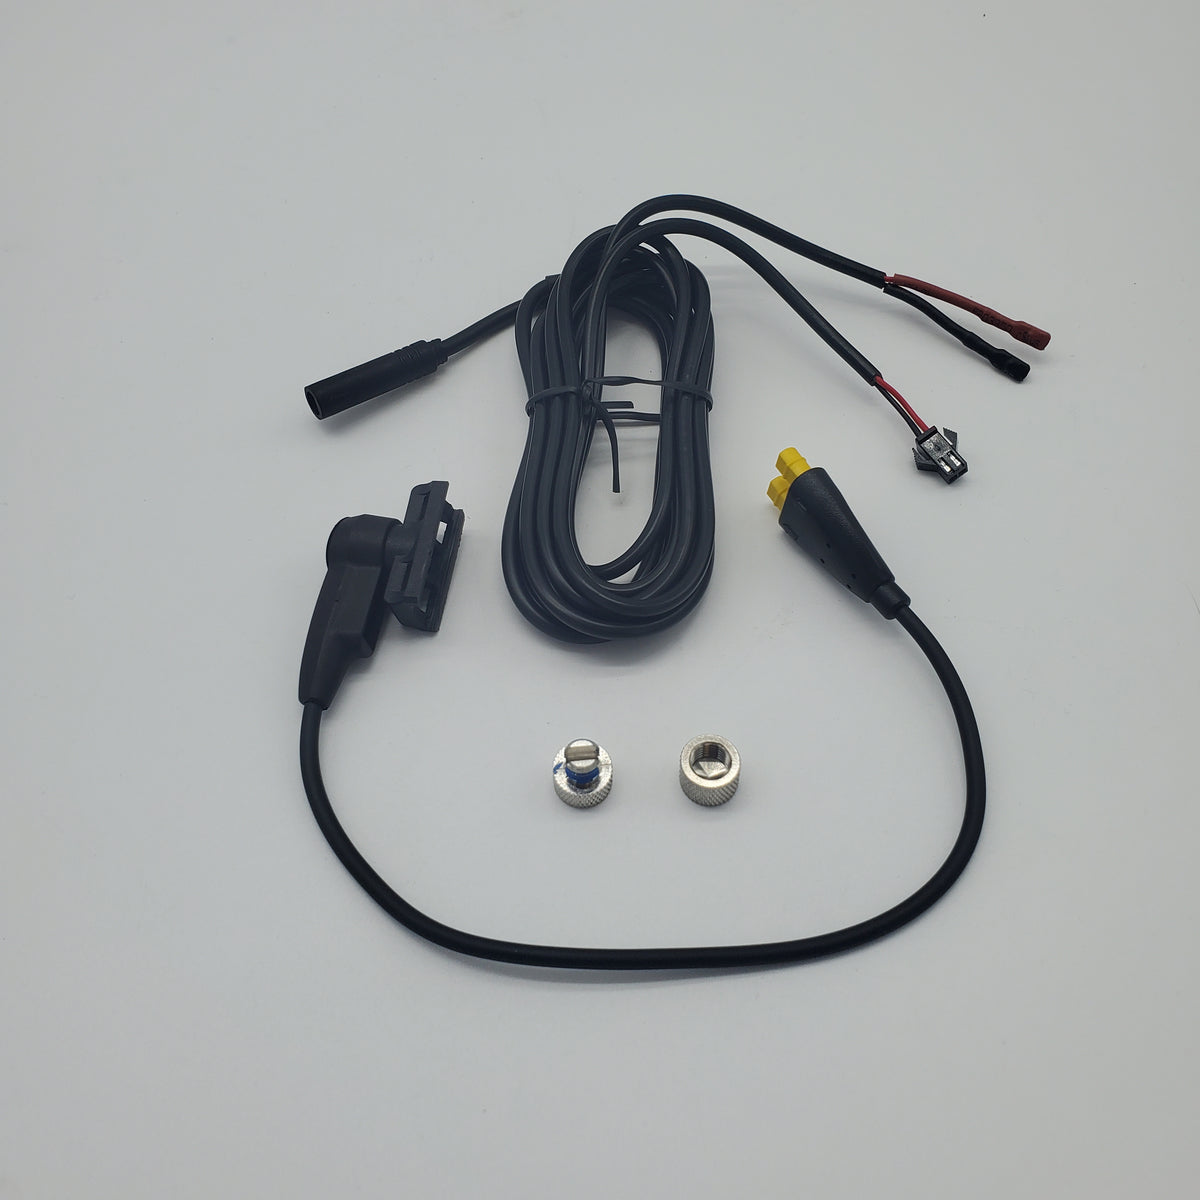 Speed Sensor w/ Extra Port and Front / Rear Light Wires (6v 0.5a Output) for TSDZ2